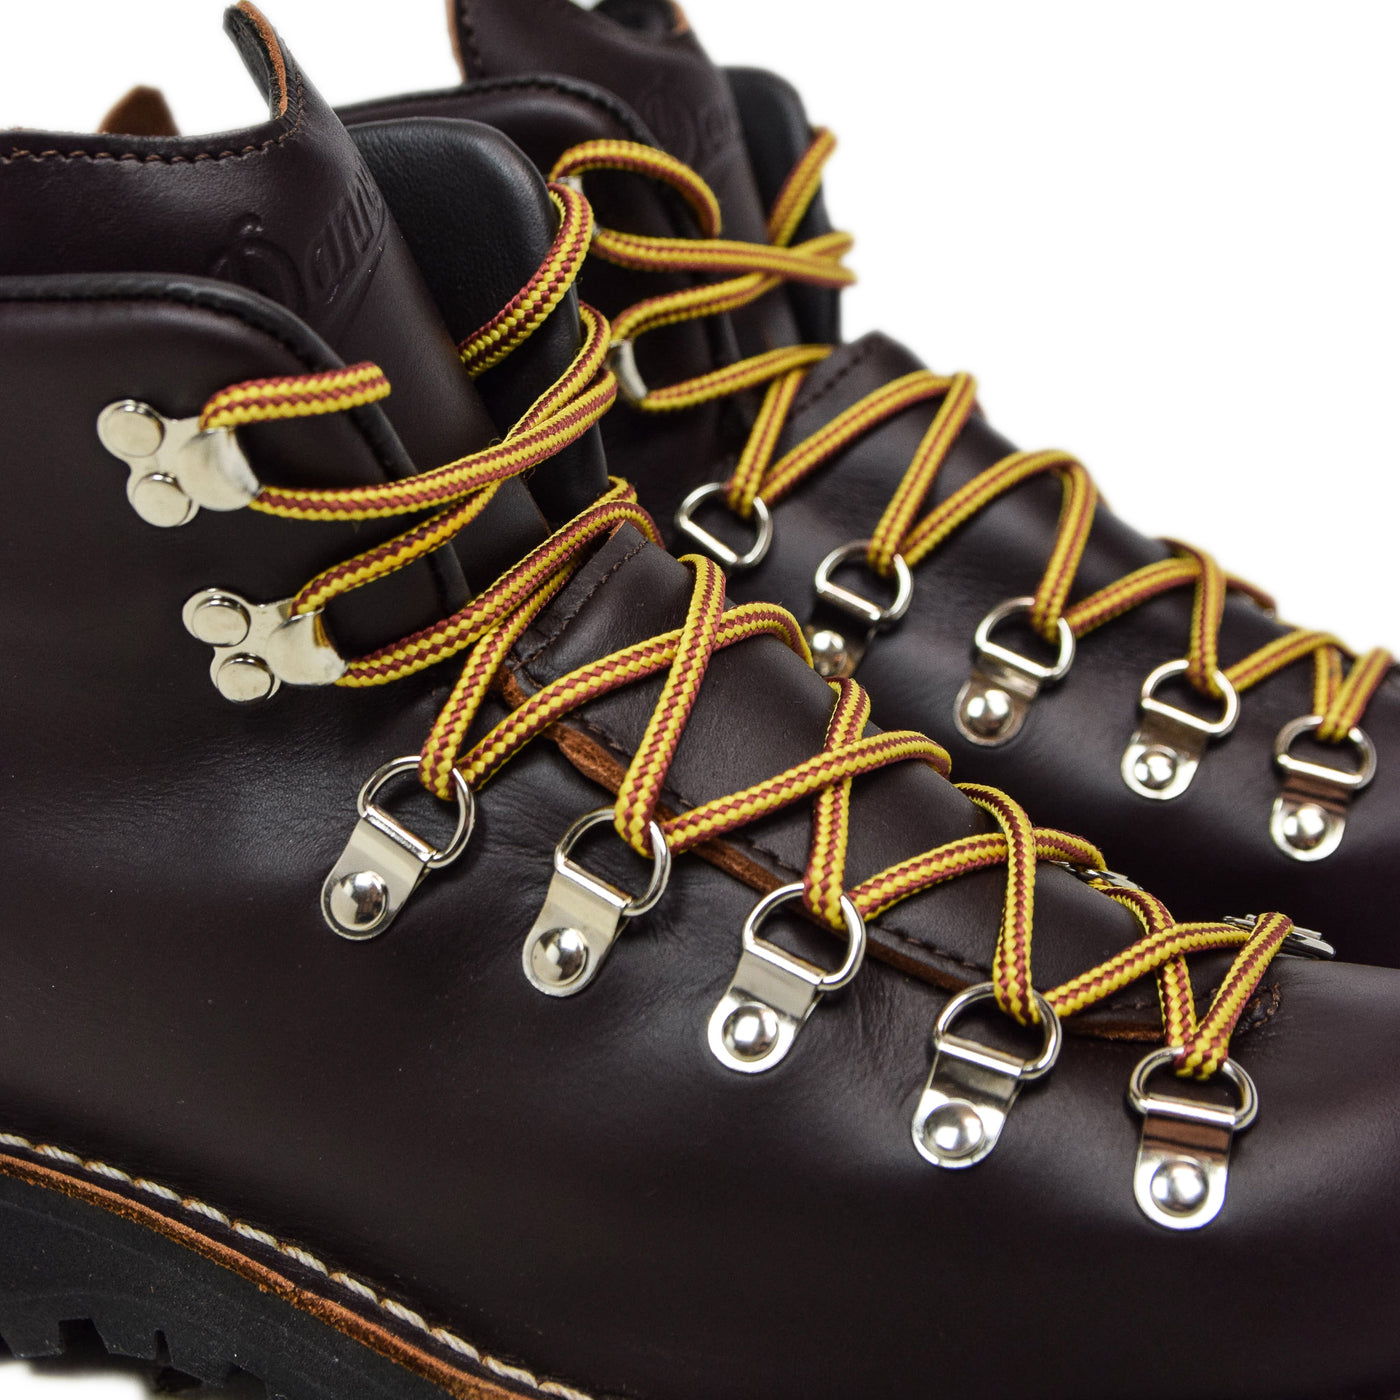 Danner Mountain Light Gore-Tex Leather Boot Brown Laces